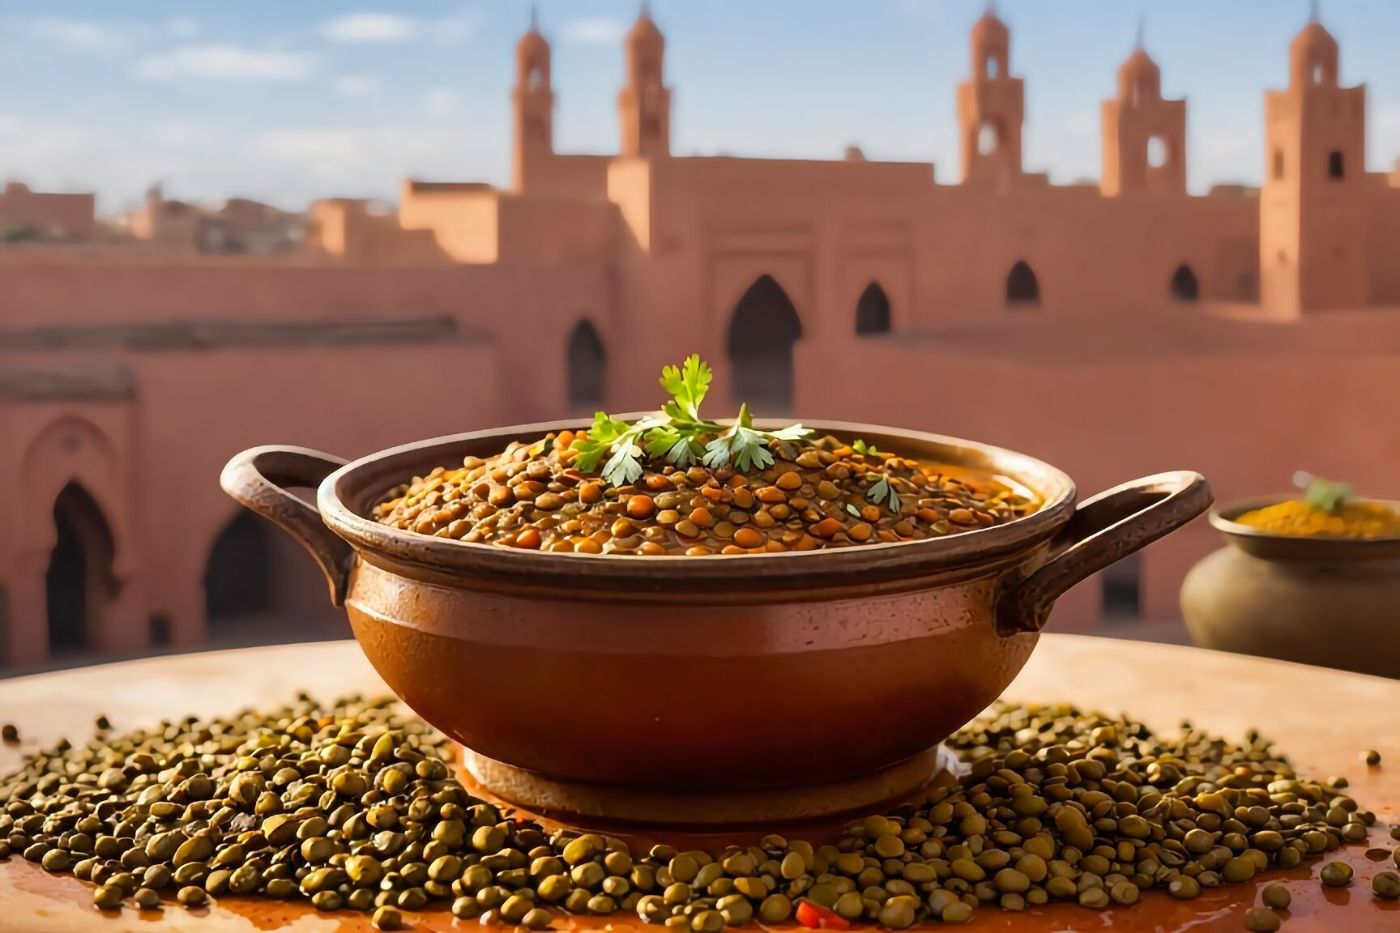 Saucy Moroccan-Spiced Lentils Recipe